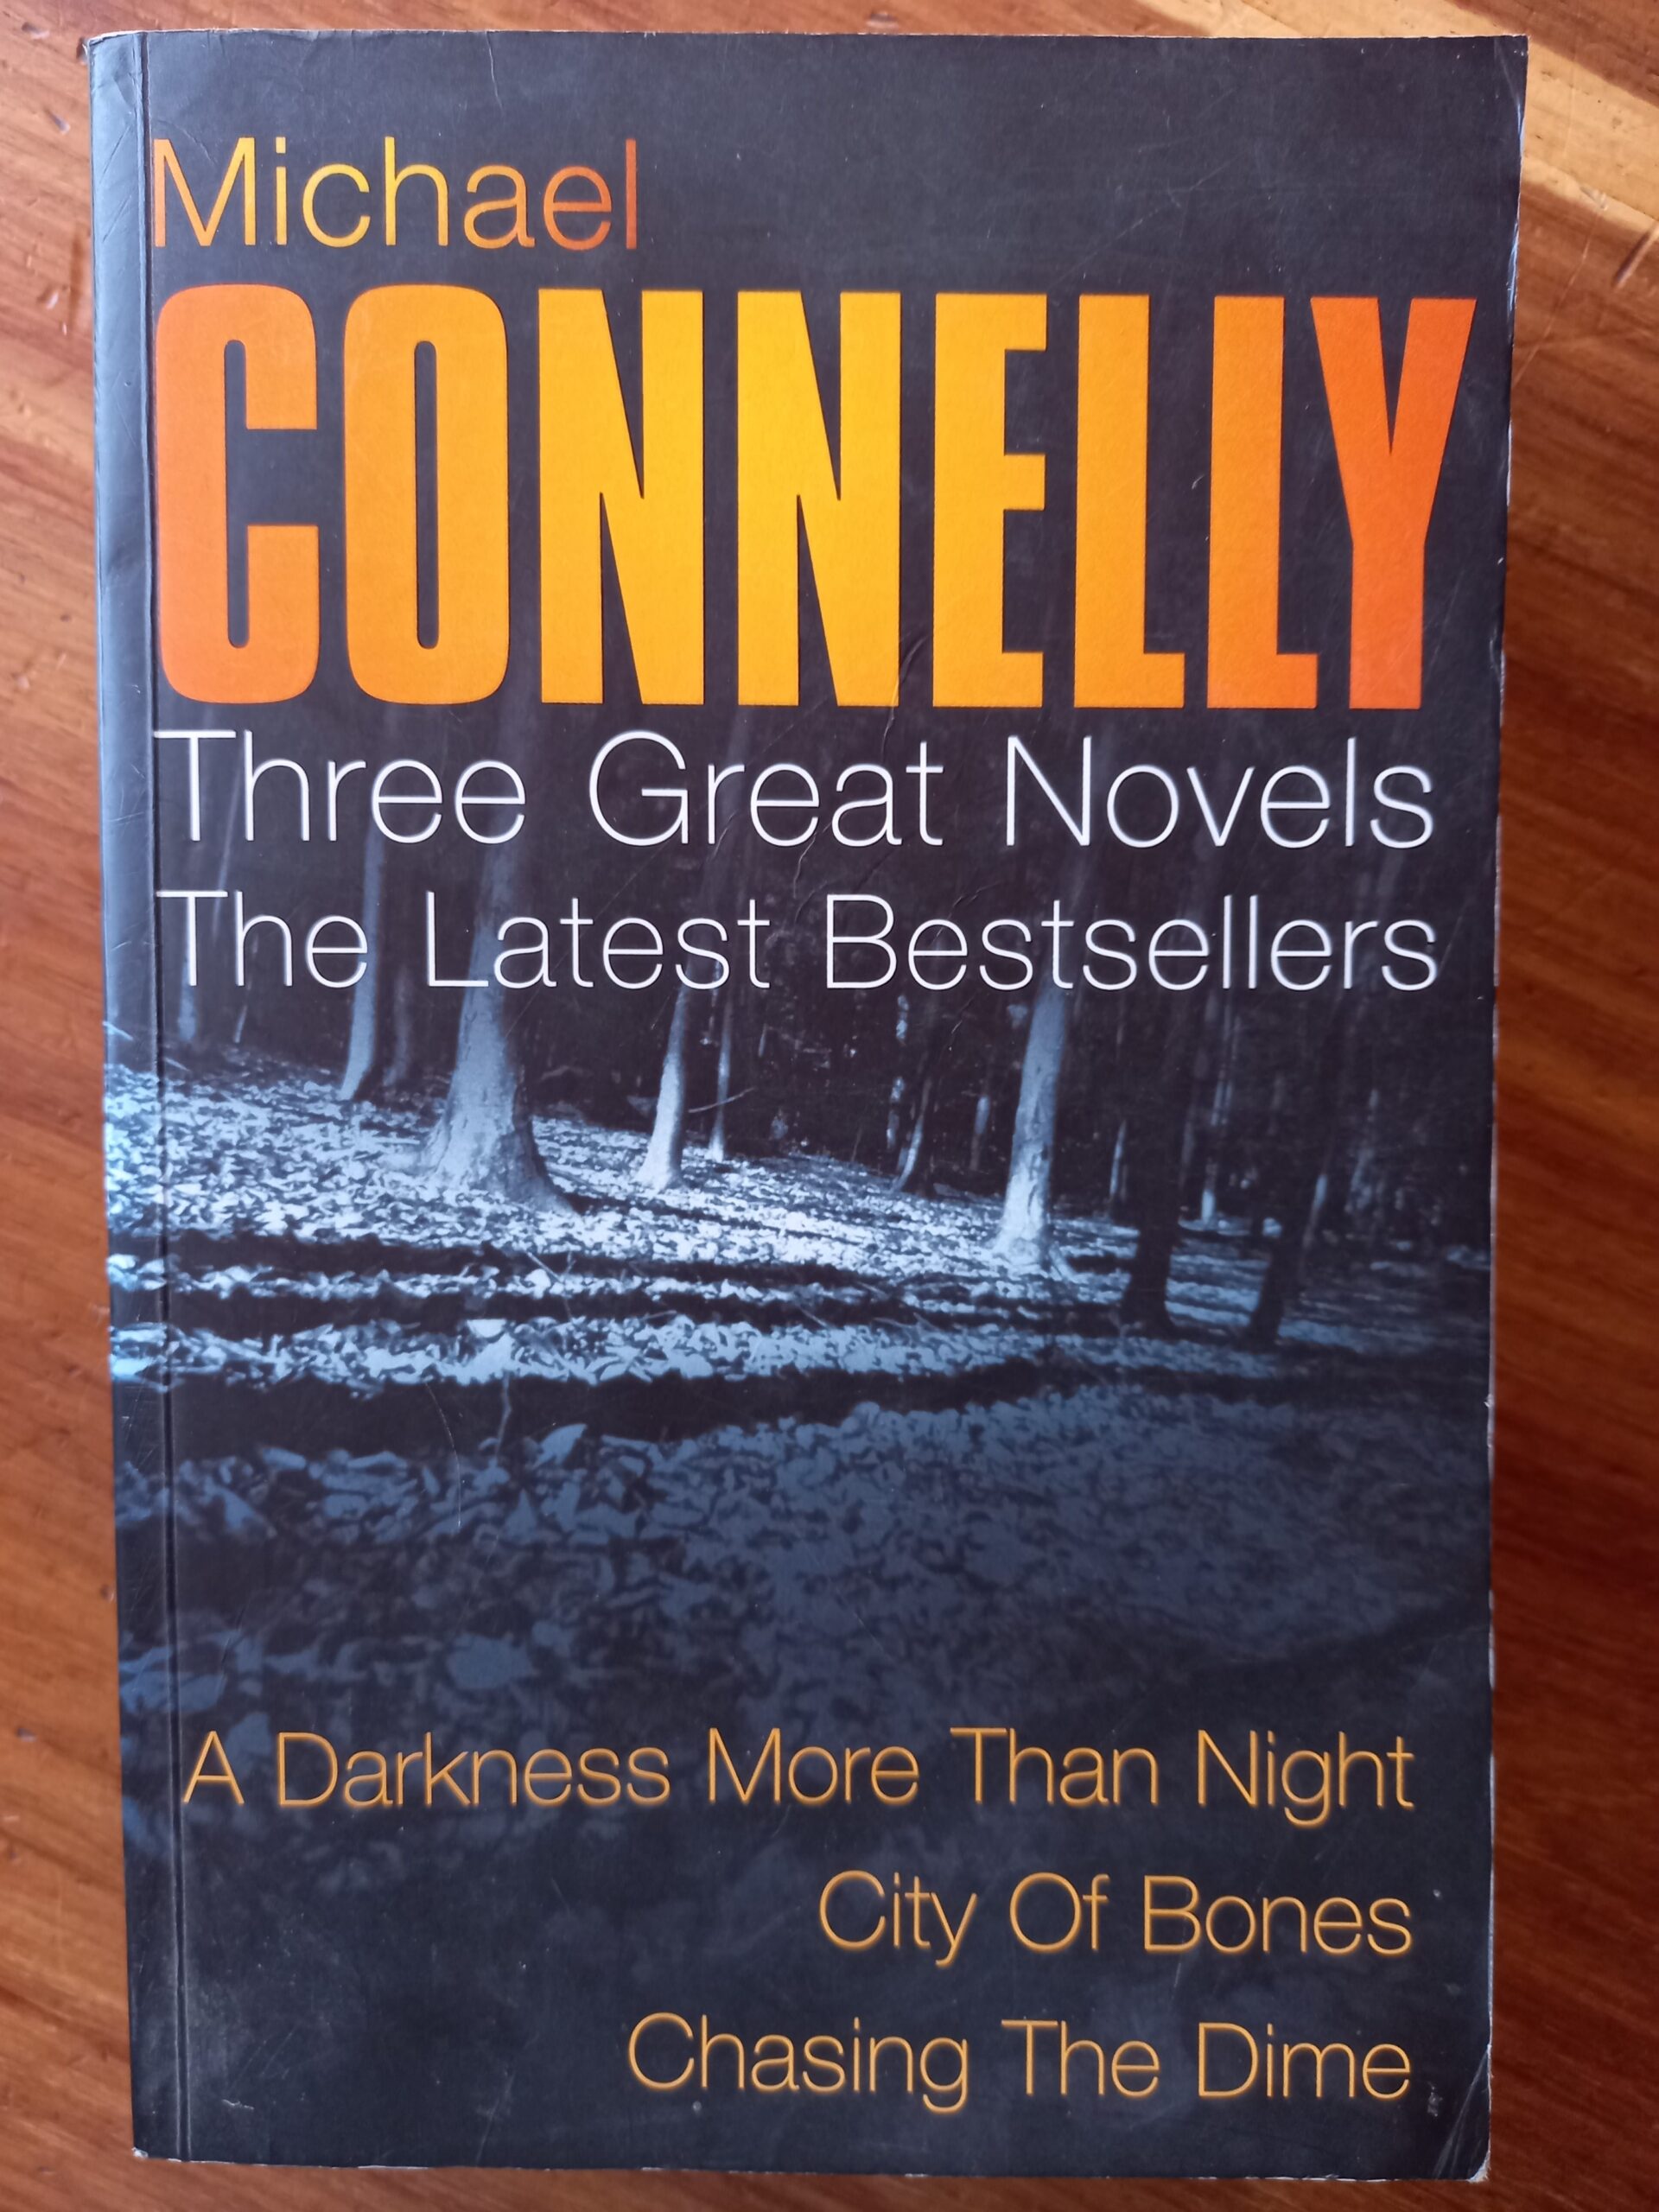 Michael Connelly (@Connellybooks) / X